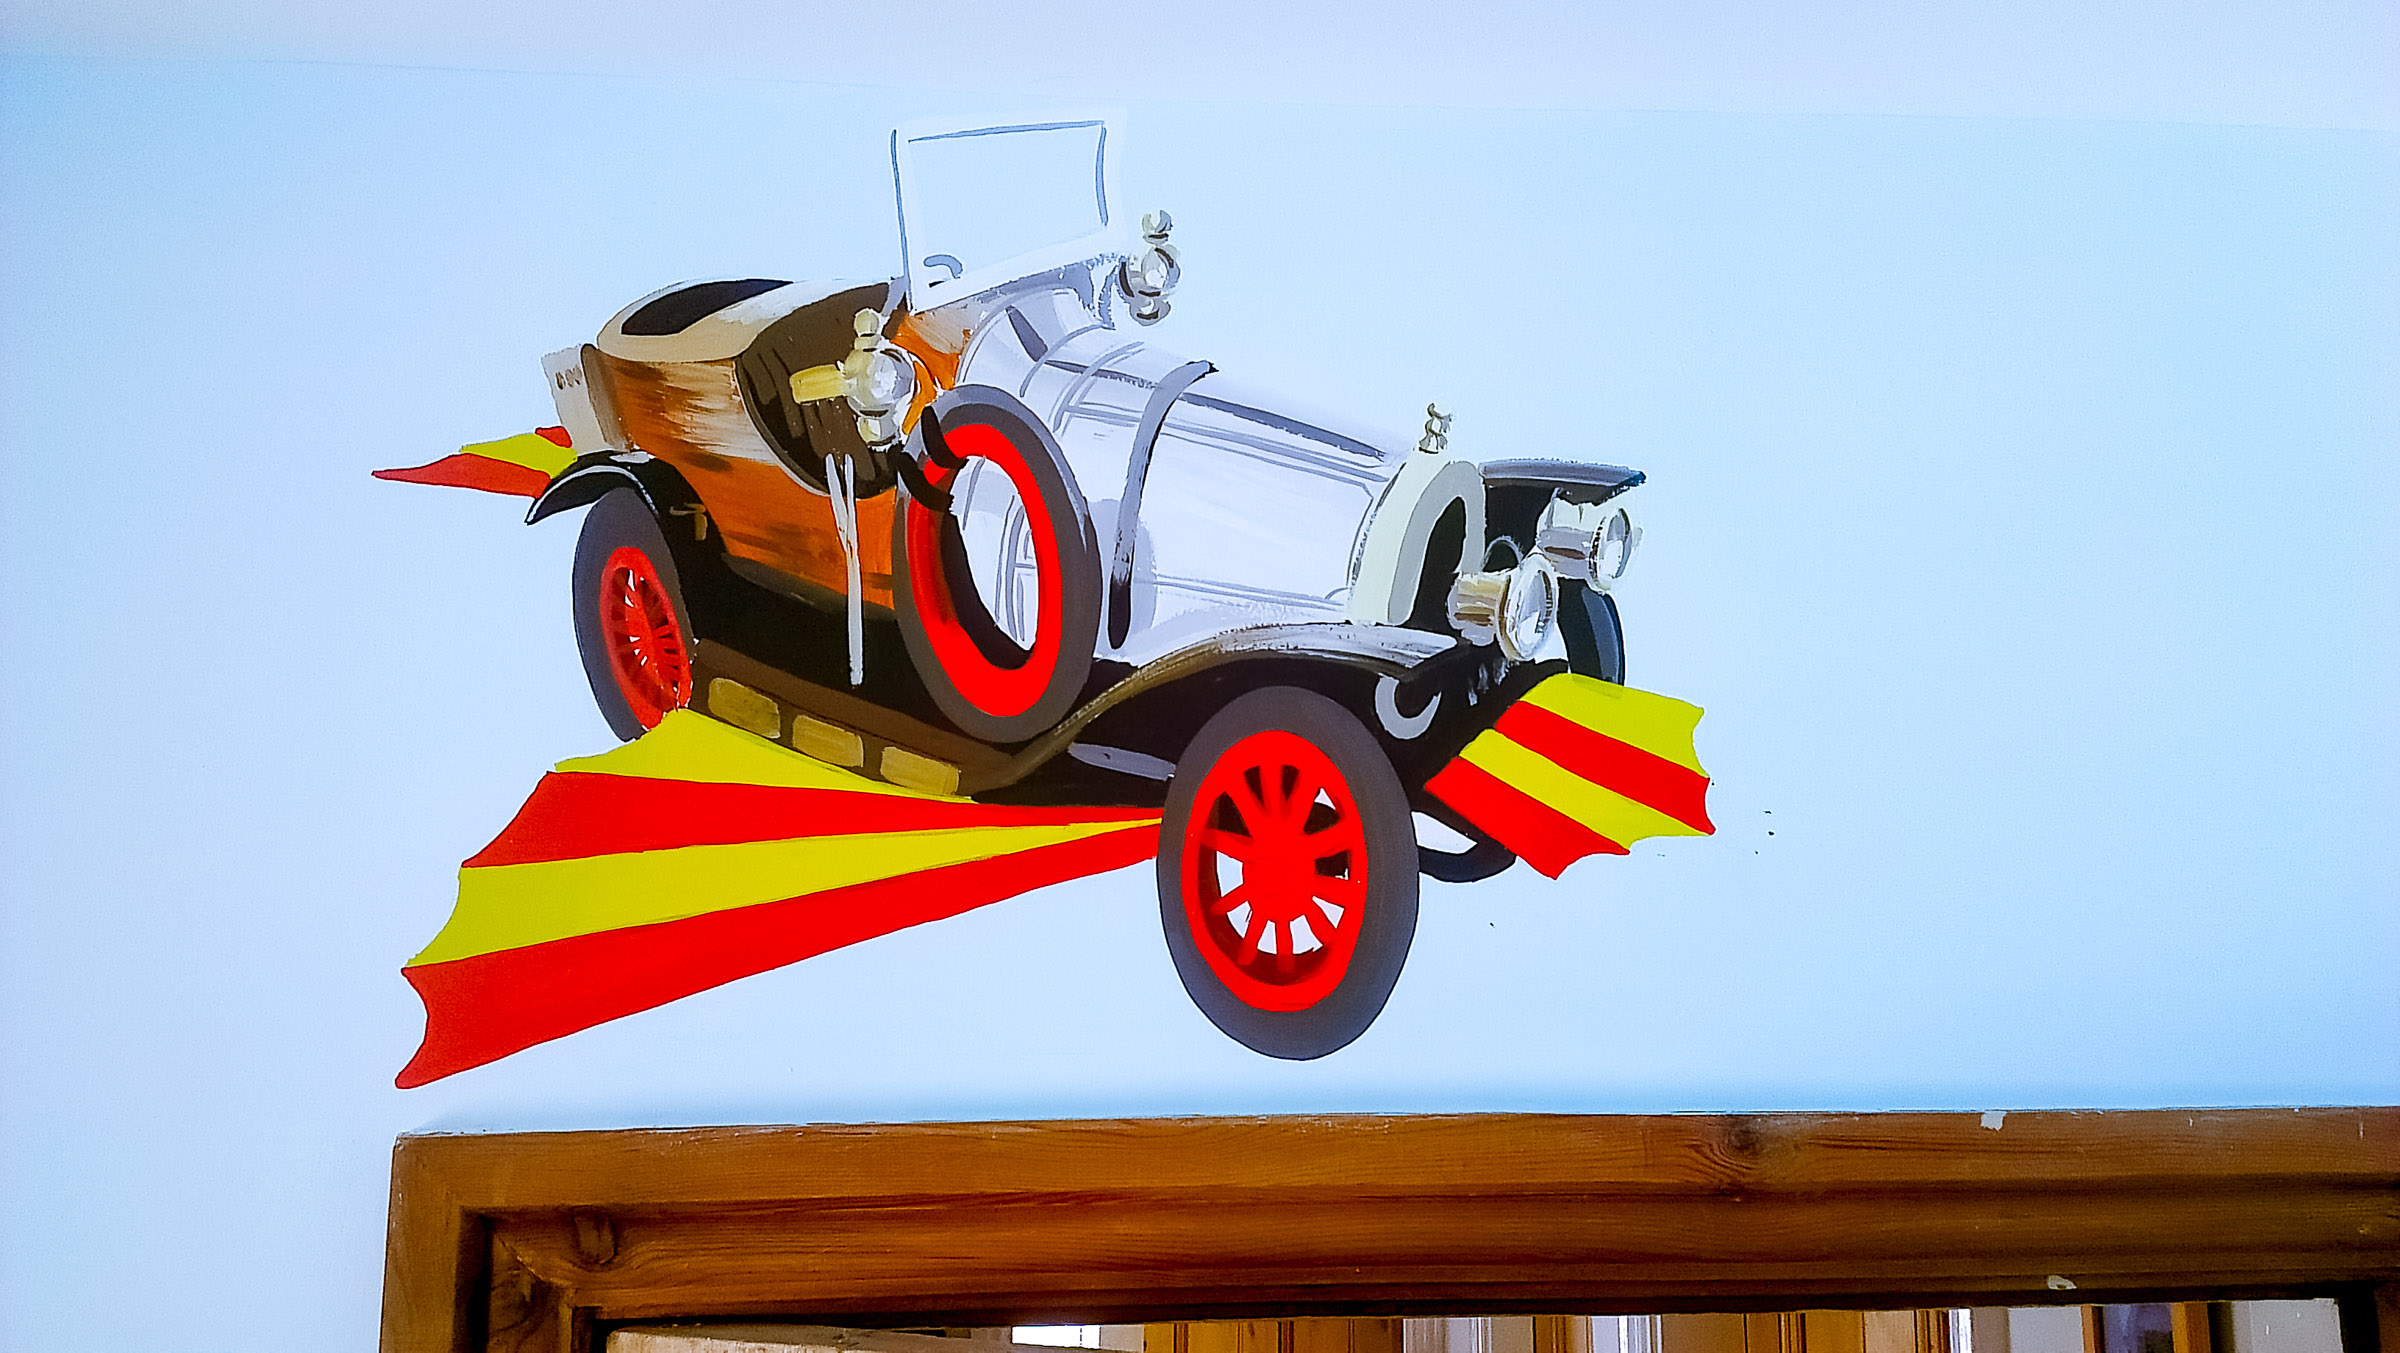 Chitty Chitty Bang Bang joining in the flying fun over the door architrave